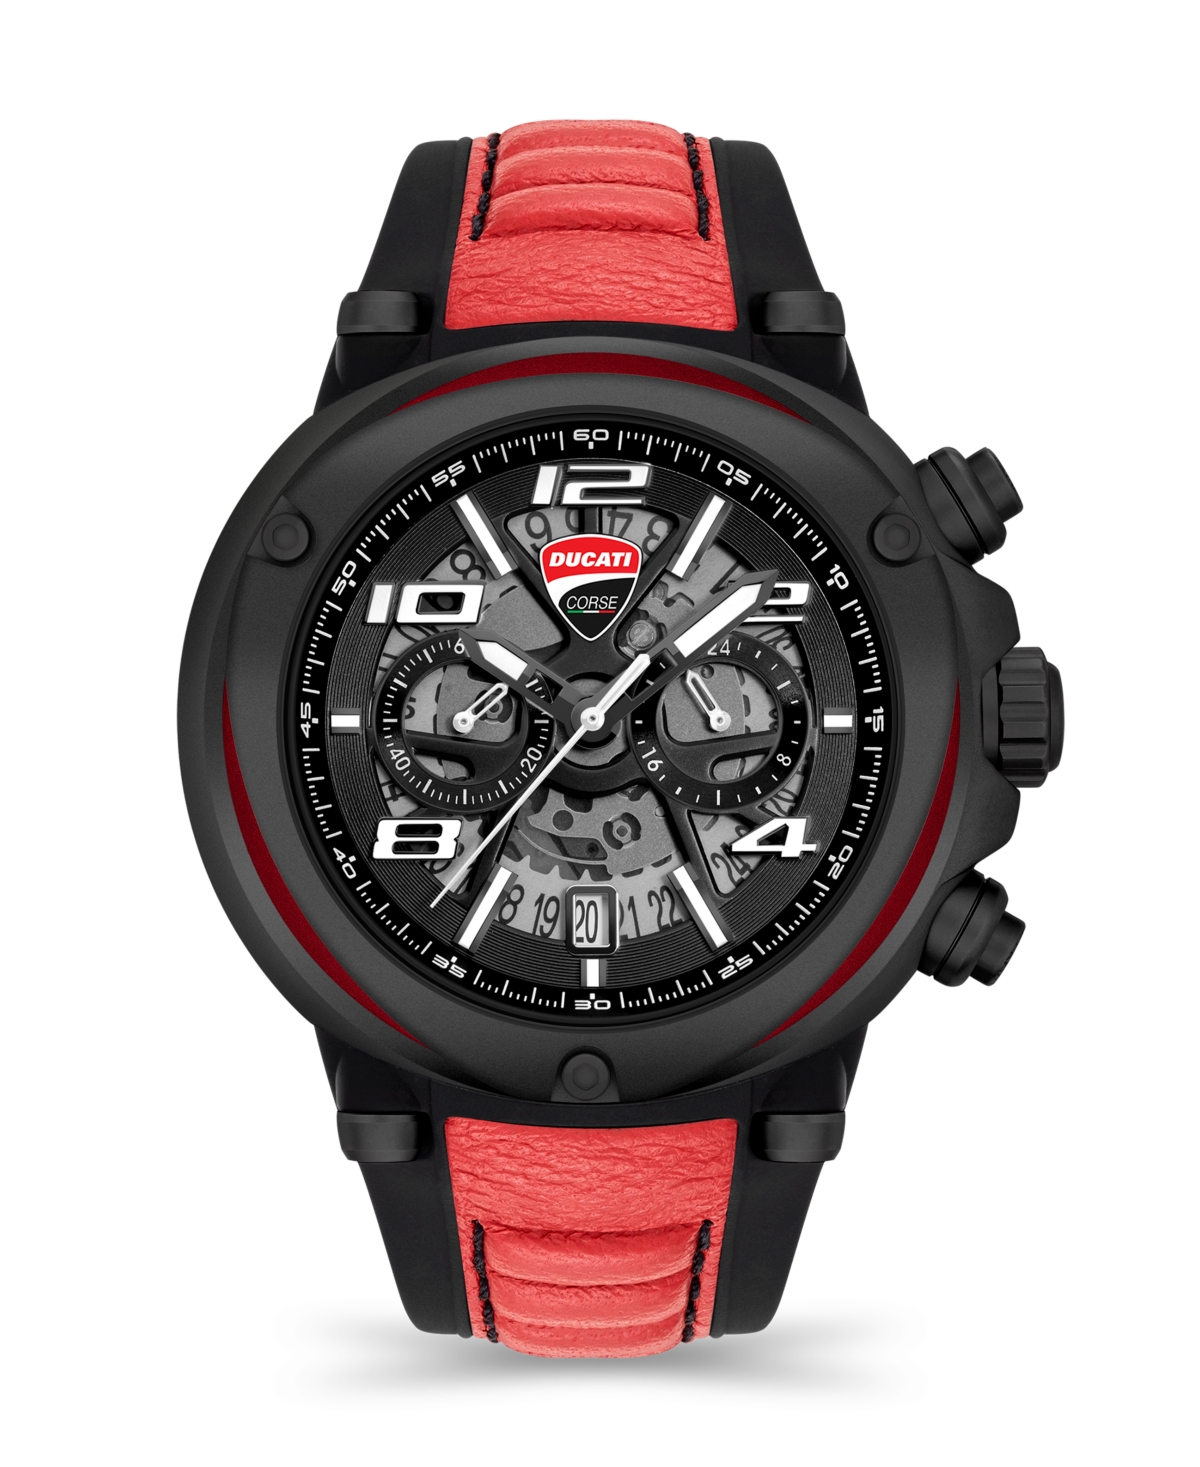 Men's Partenza Collection Chronograph Timepiece Black Silicon with Red Leather Strap Watch, 49mm - Black